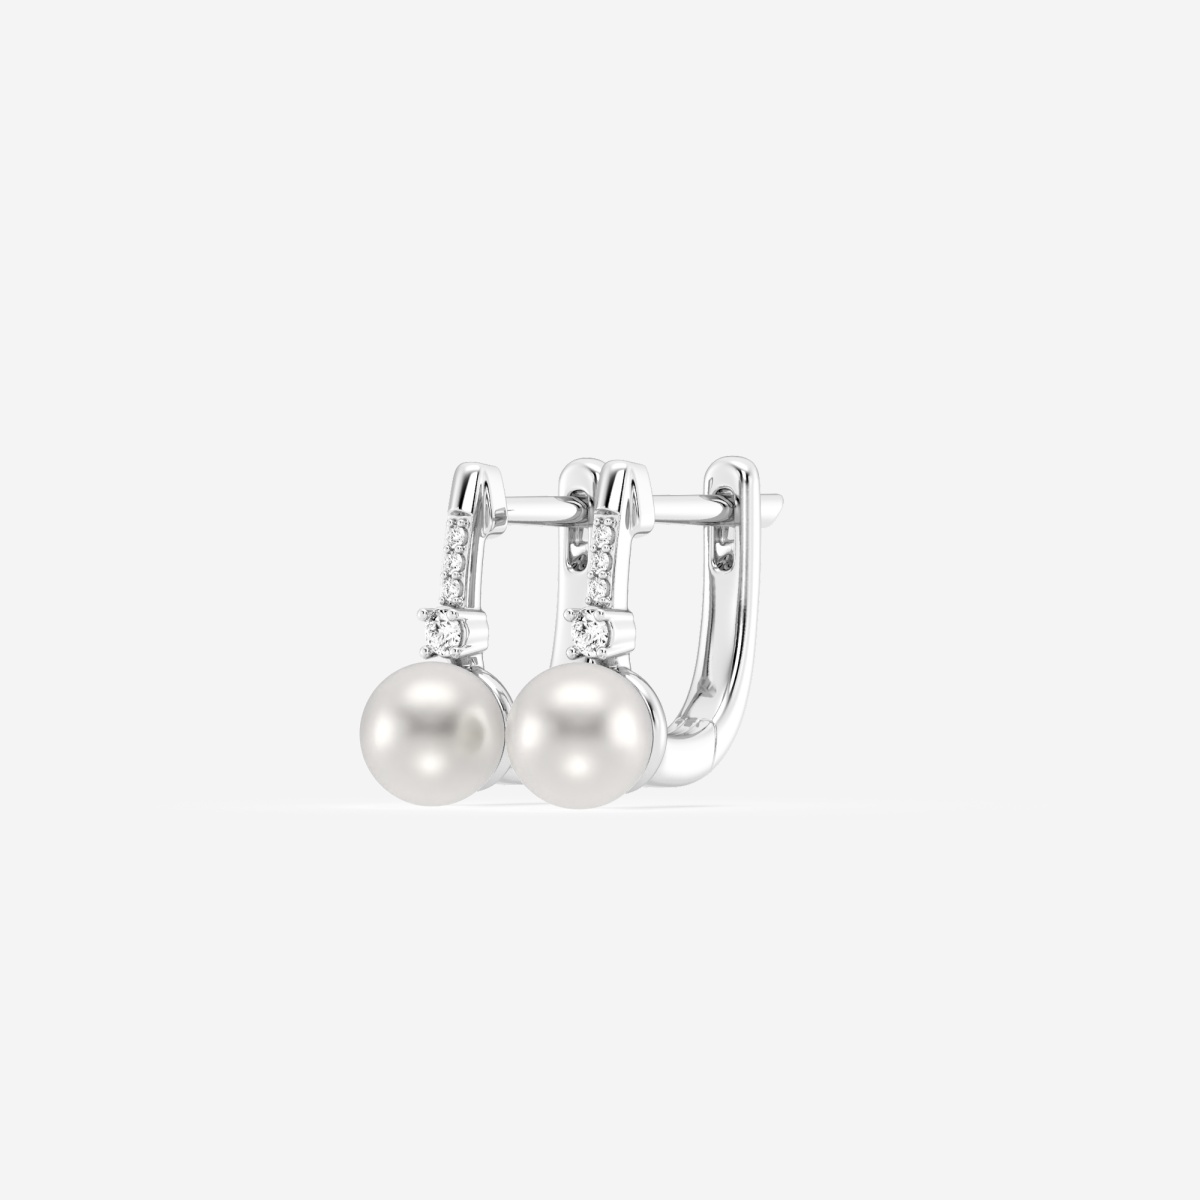 Additional Image 1 for  5.5 - 6.0 mm Cultured Freshwater Pearl and 1/10 ctw Lab Grown Diamond Leverback Drop Earrings